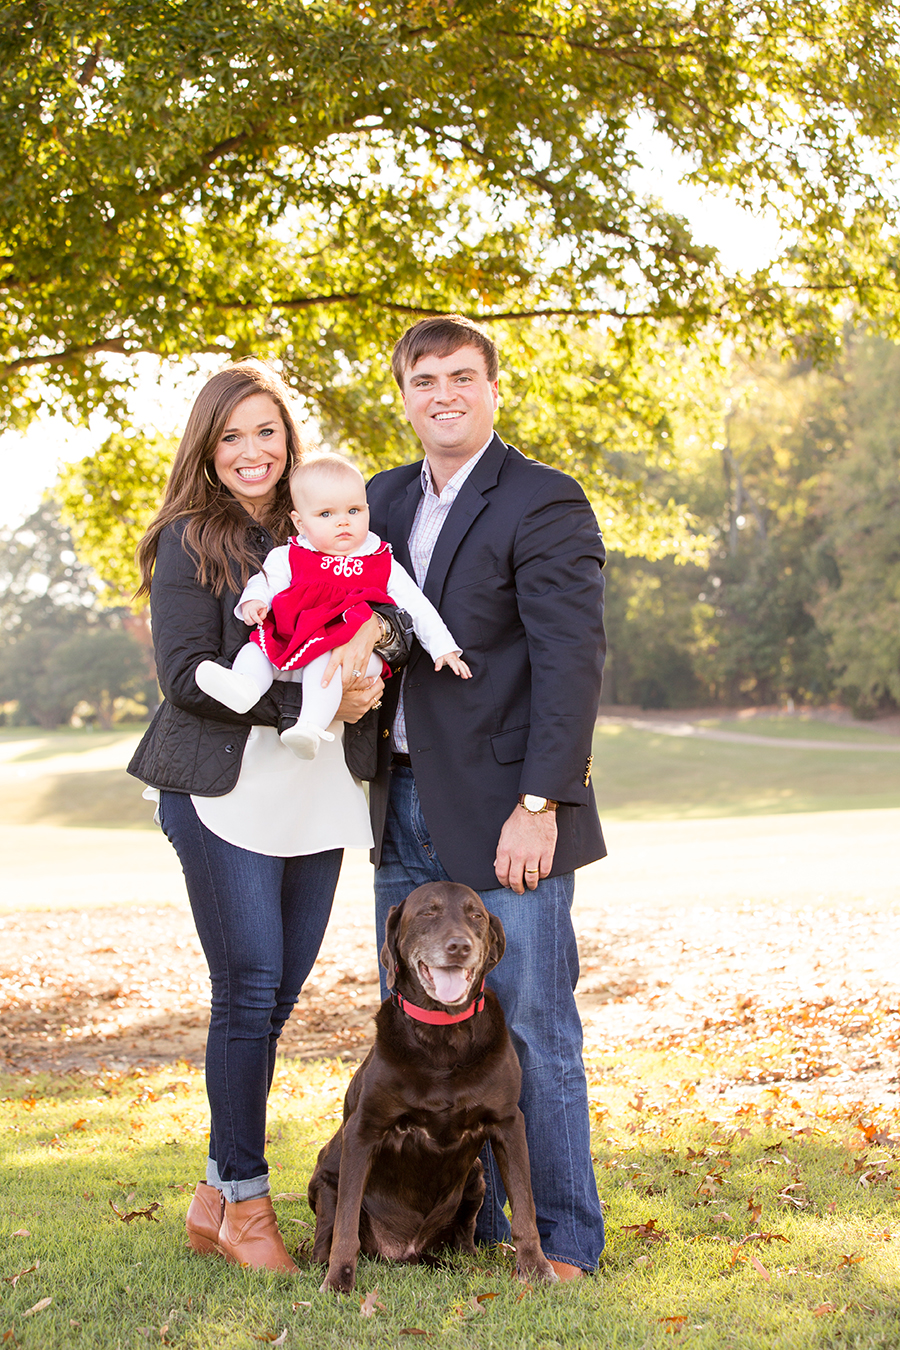 Hunter Family Photos at The Country Club of Virginia - Image Property of www.j-dphoto.com